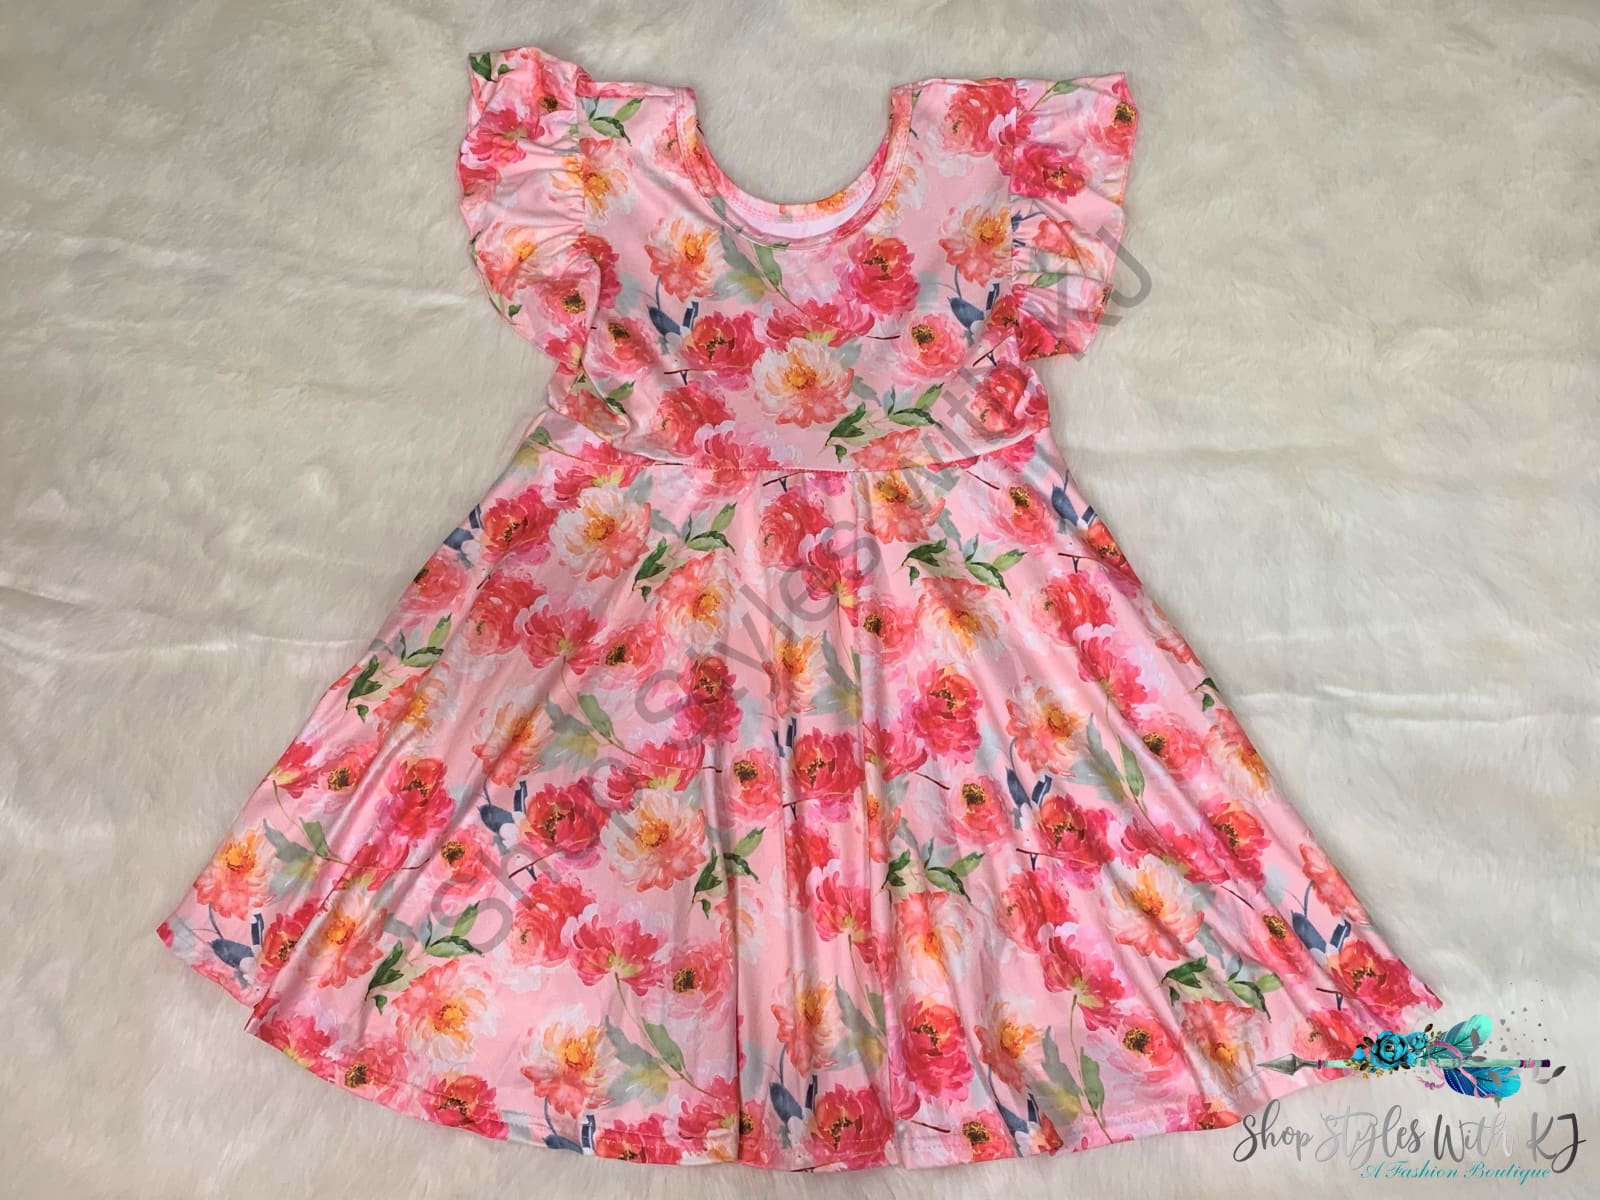 Brushed Rose Among The Thorns Dress Kids